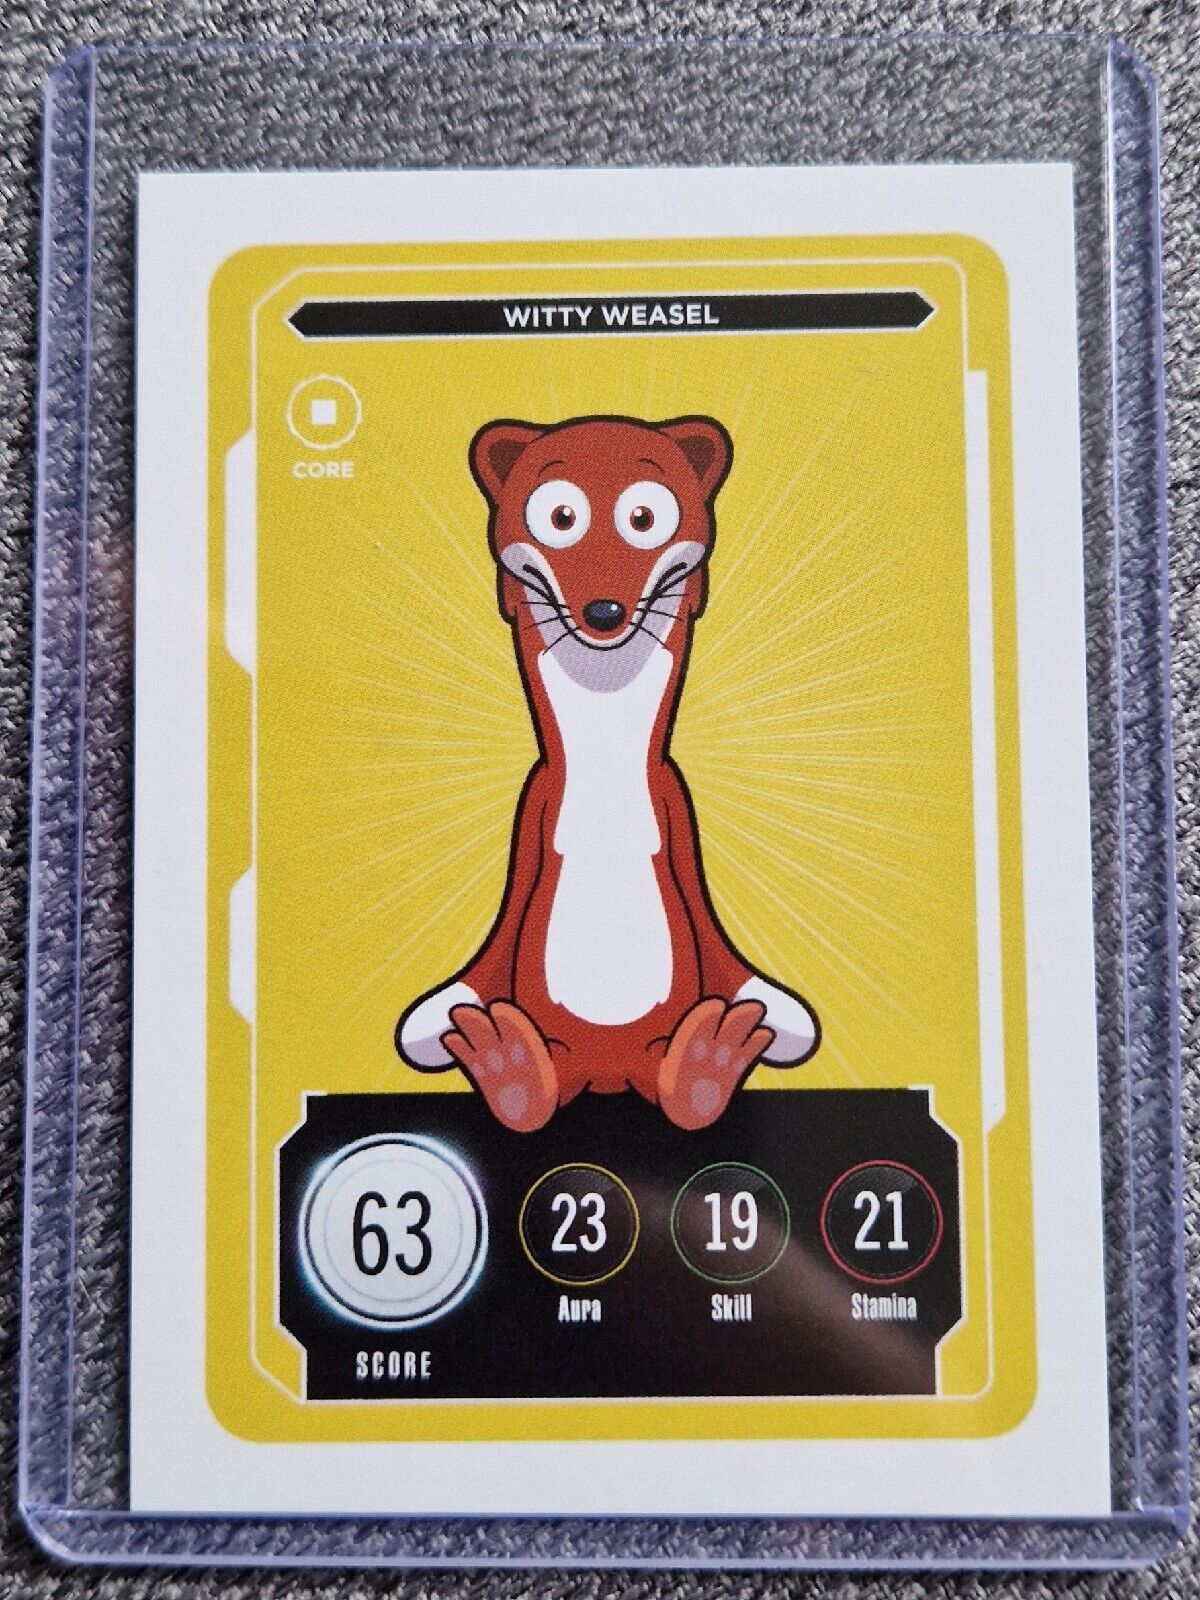 Witty Weasel Core Veefriends 2 Compete And Collect Trading Card Zerocool